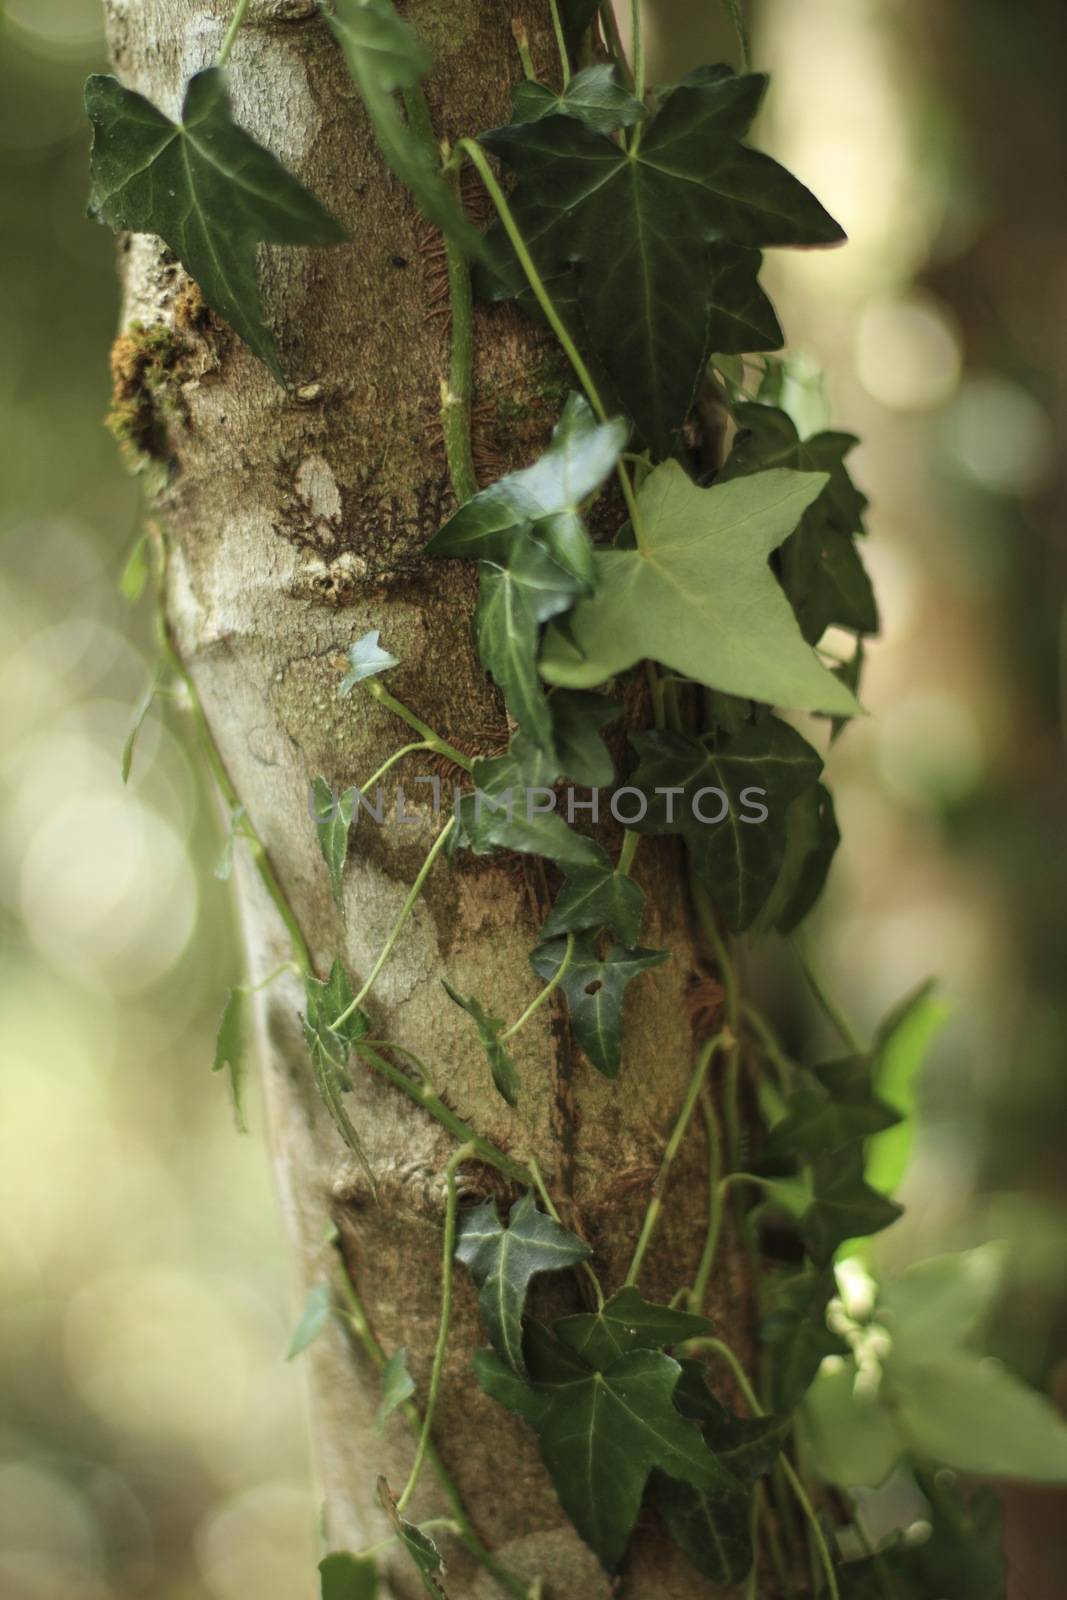 Ivy on a tree trunk by MC2000